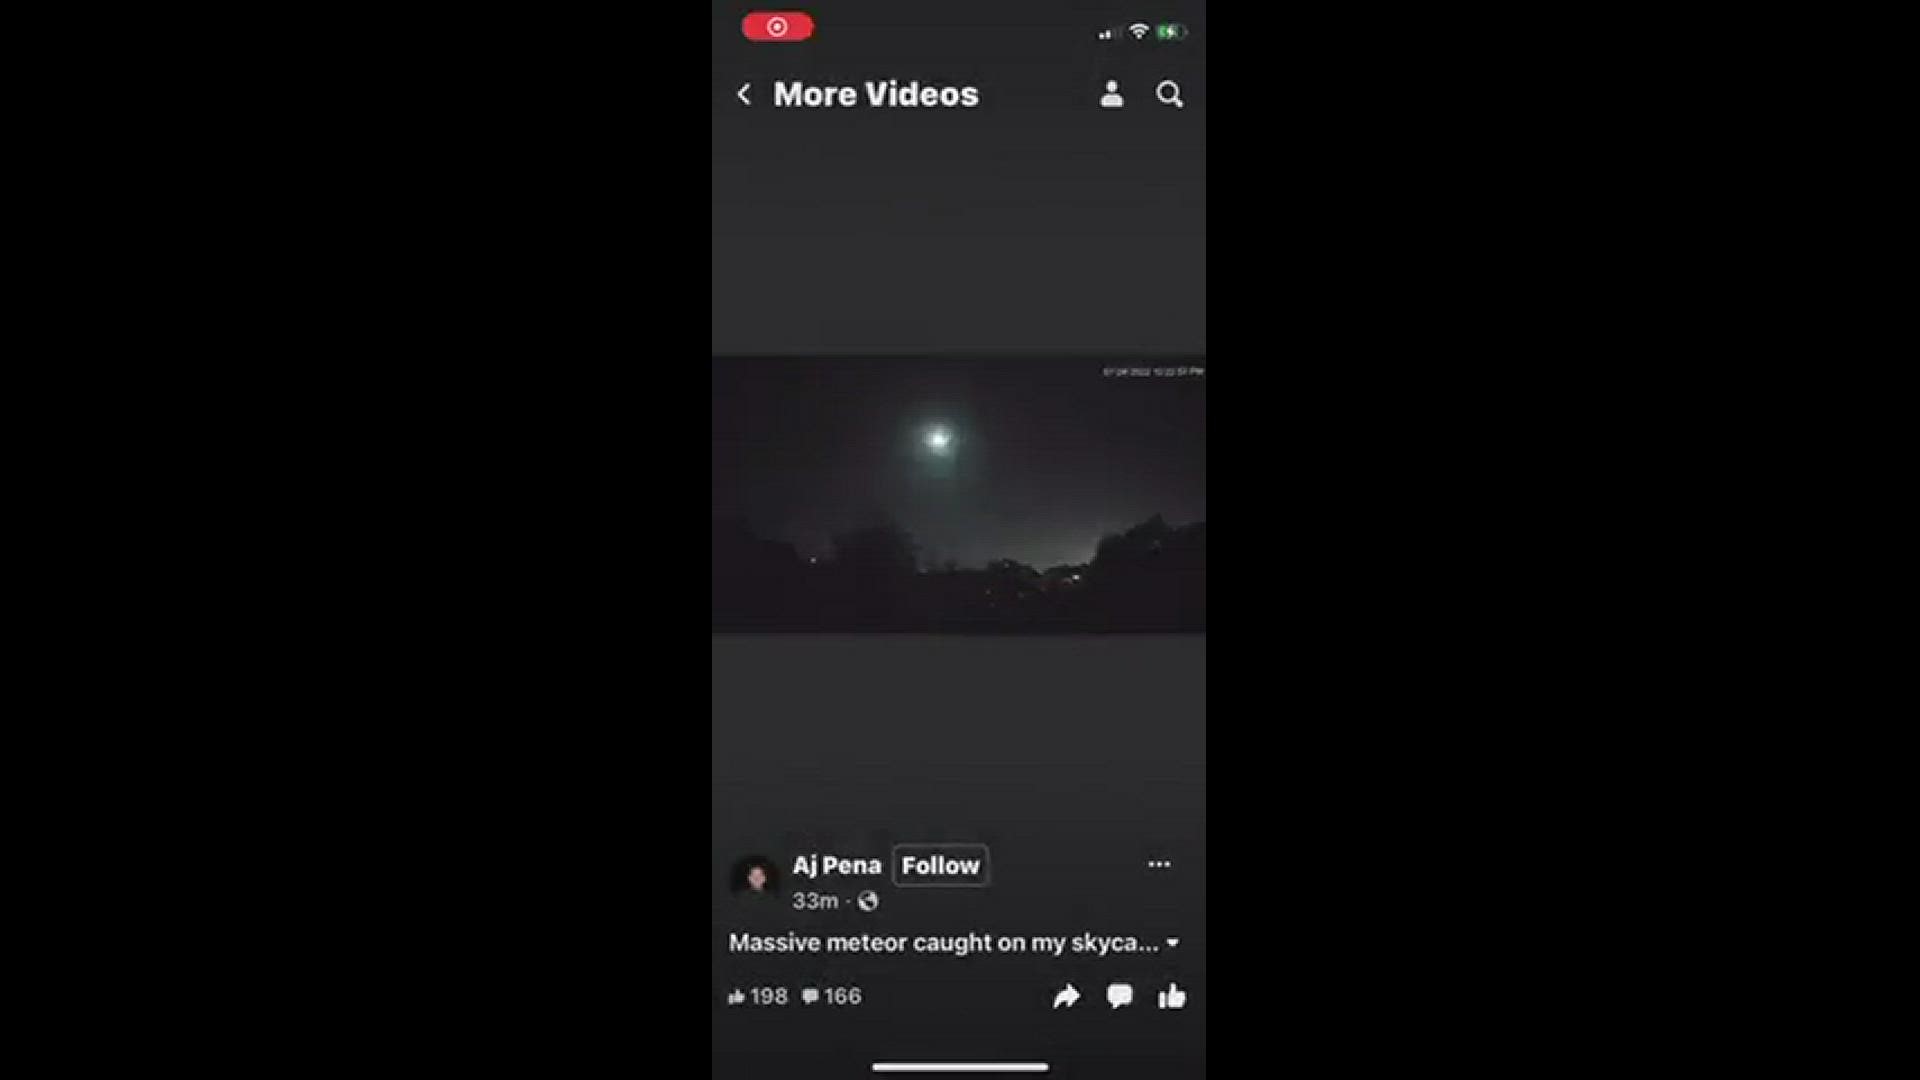 An asteroid hits Hutto and sends shockwave throughout tx. Farthest report of Sighting or felt is in Taylor, Texas.
Credit: @Aj Pena on Facebook